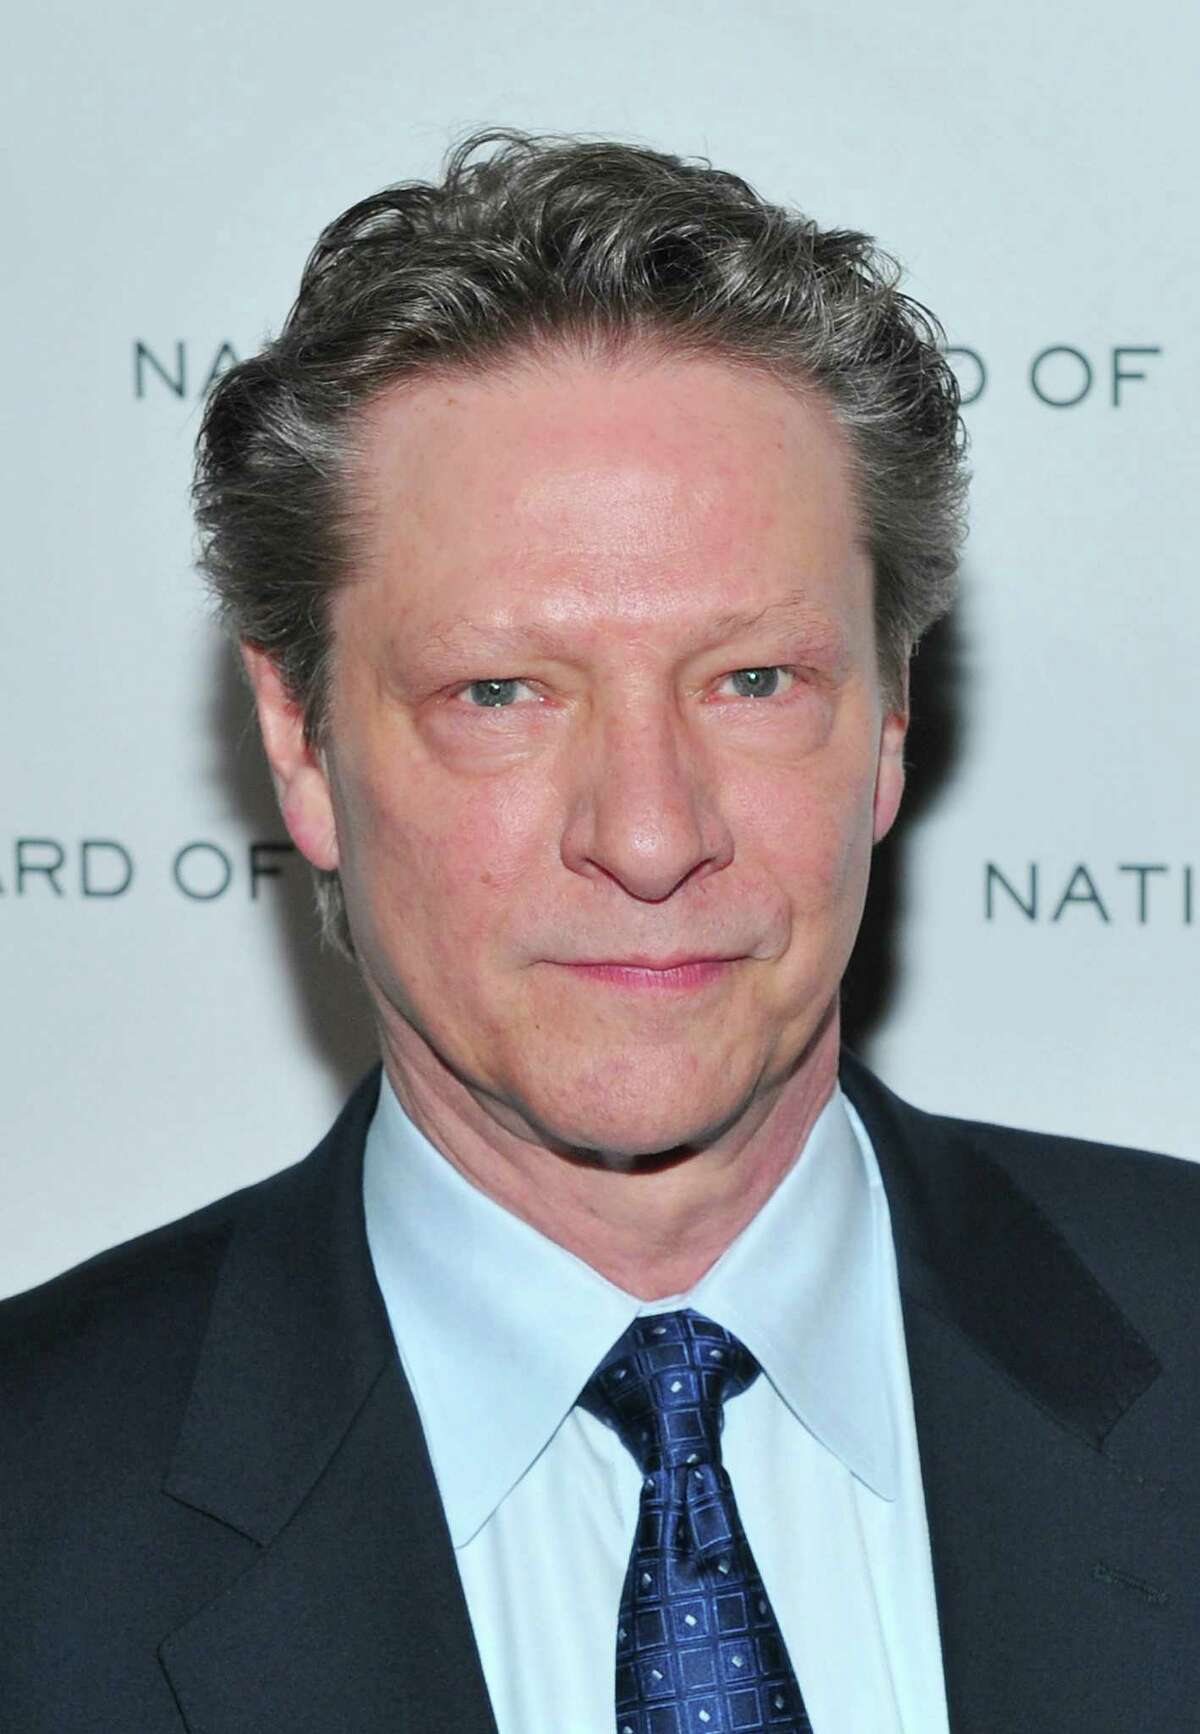 NEW YORK, NY - JANUARY 11: Actor Chris Cooper attends the 2011 National Board of Review of Motion Pictures Gala at Cipriani 42nd Street on January 11, 2011 in New York City. (Photo by Mike Coppola/Getty Images)